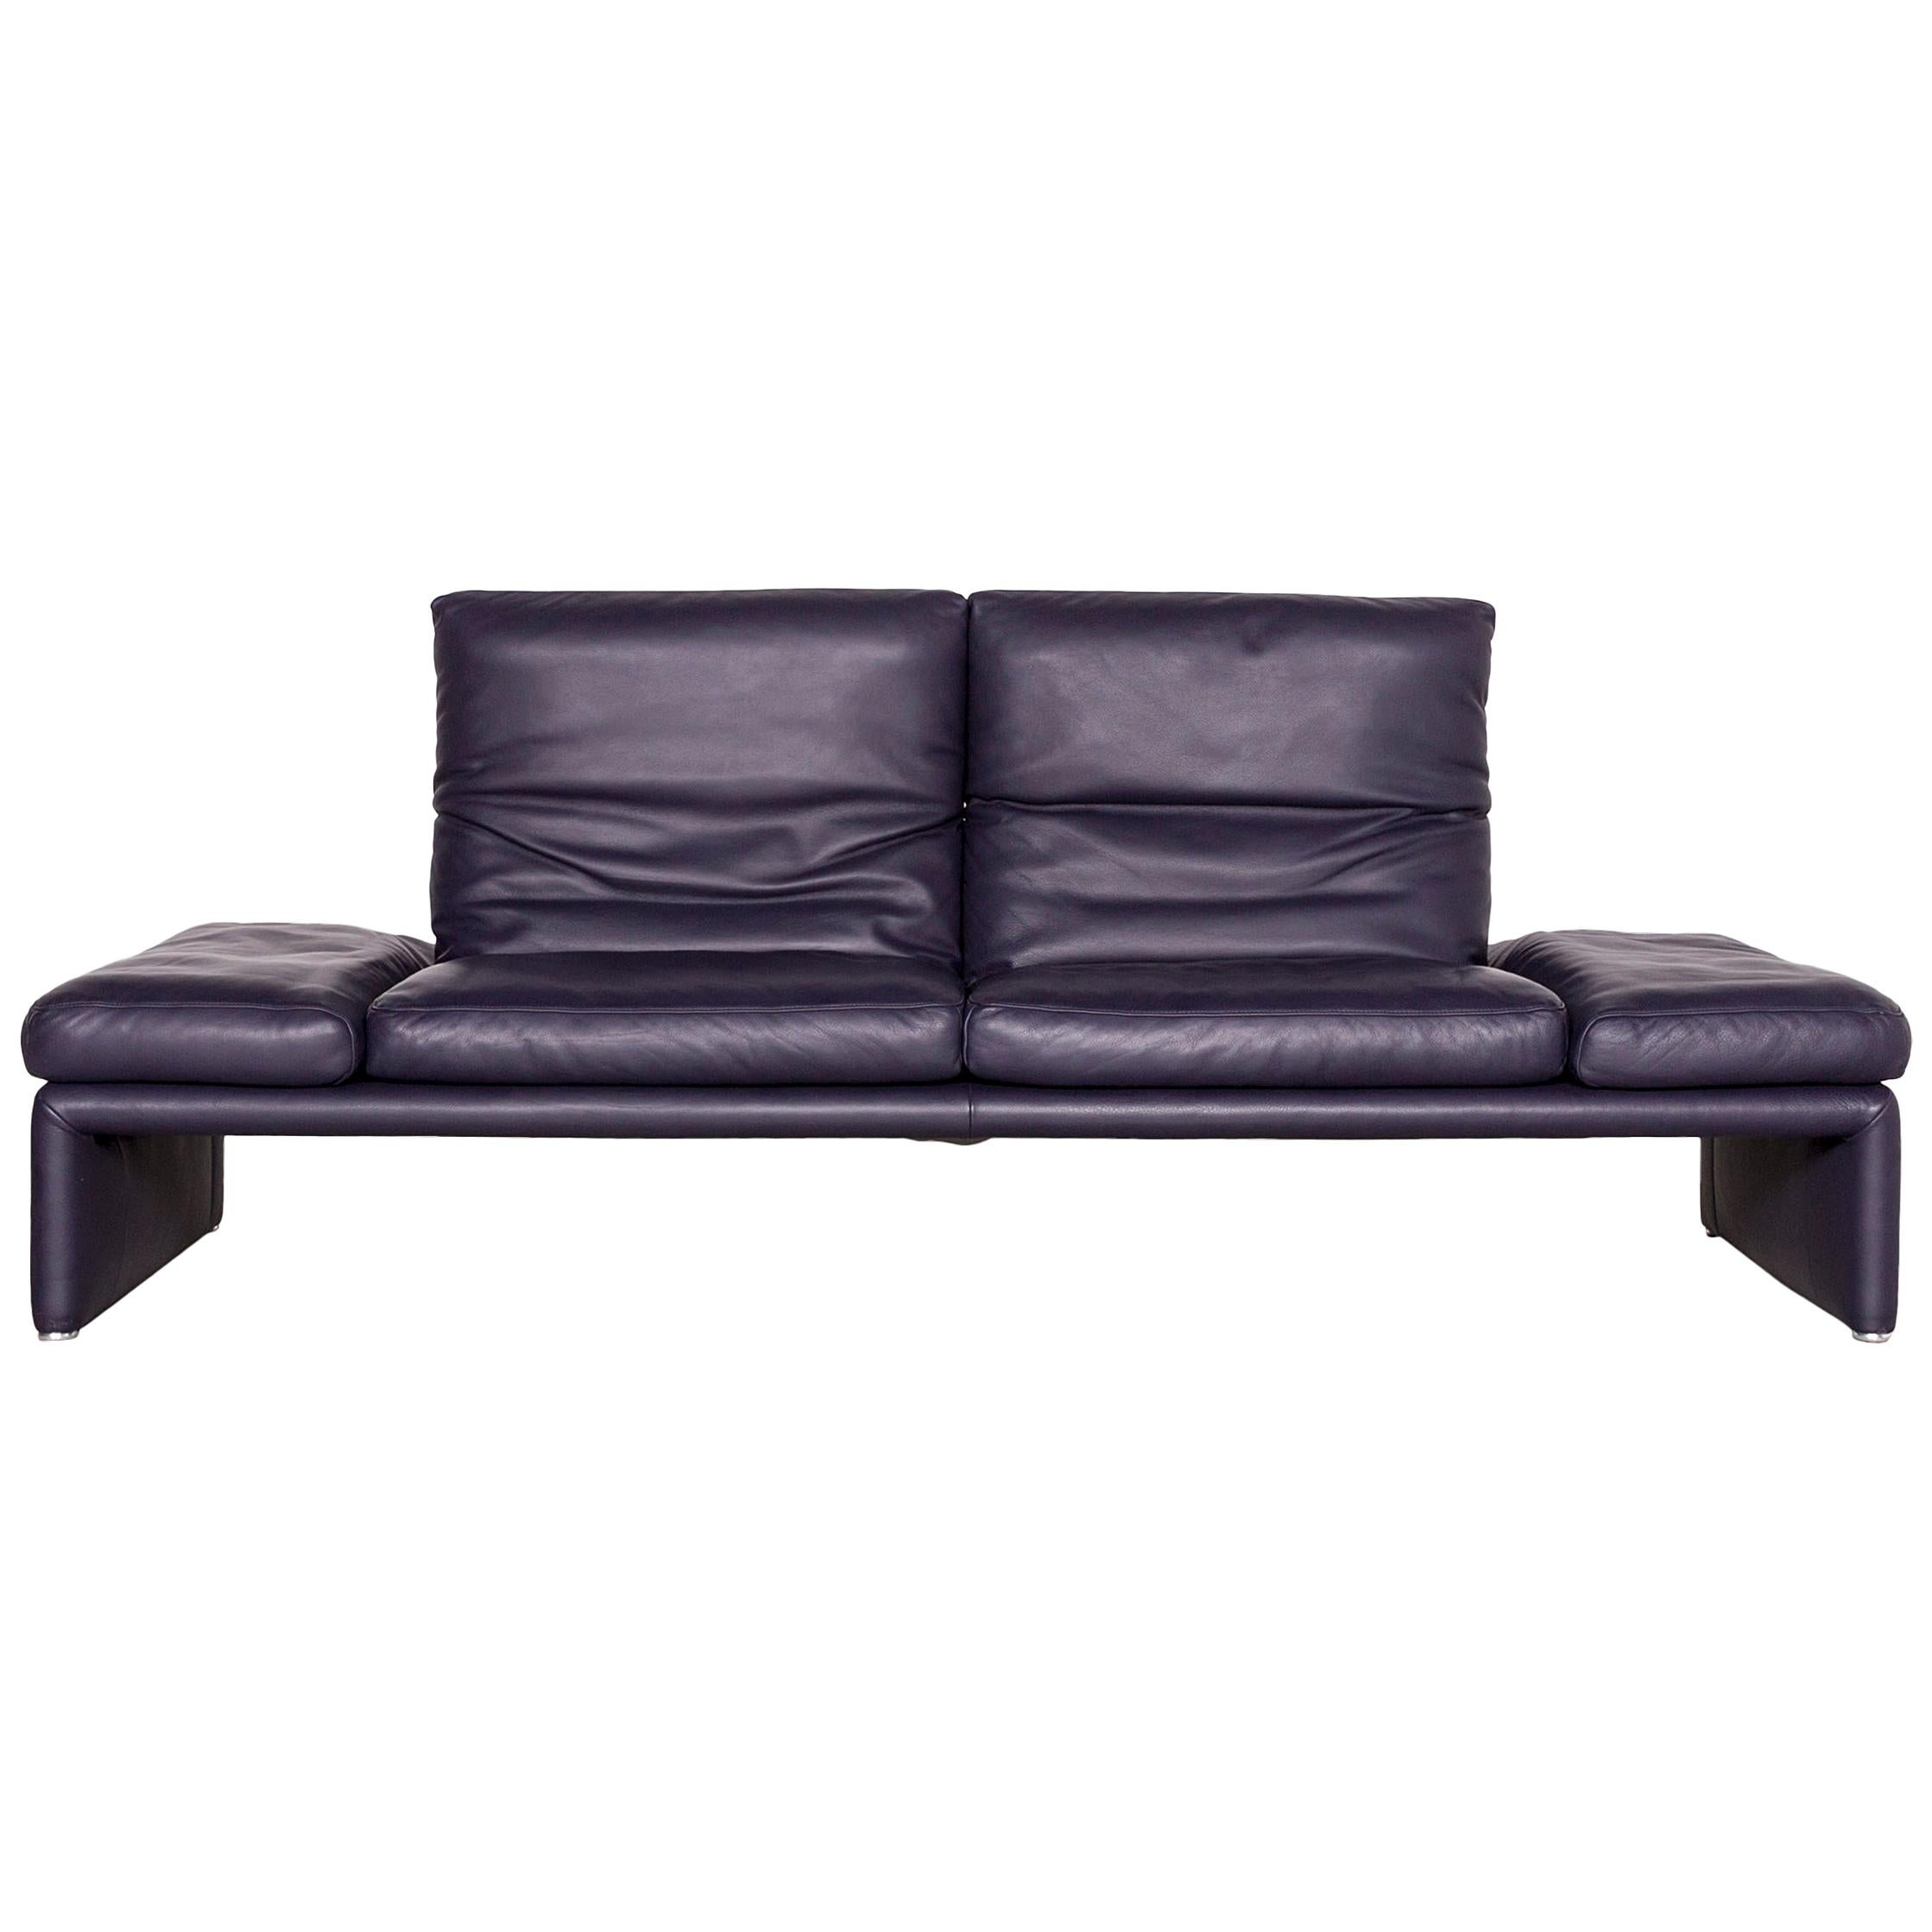 Koinor Raoul Designer Sofa Purple Leather Three-Seat Couch For Sale